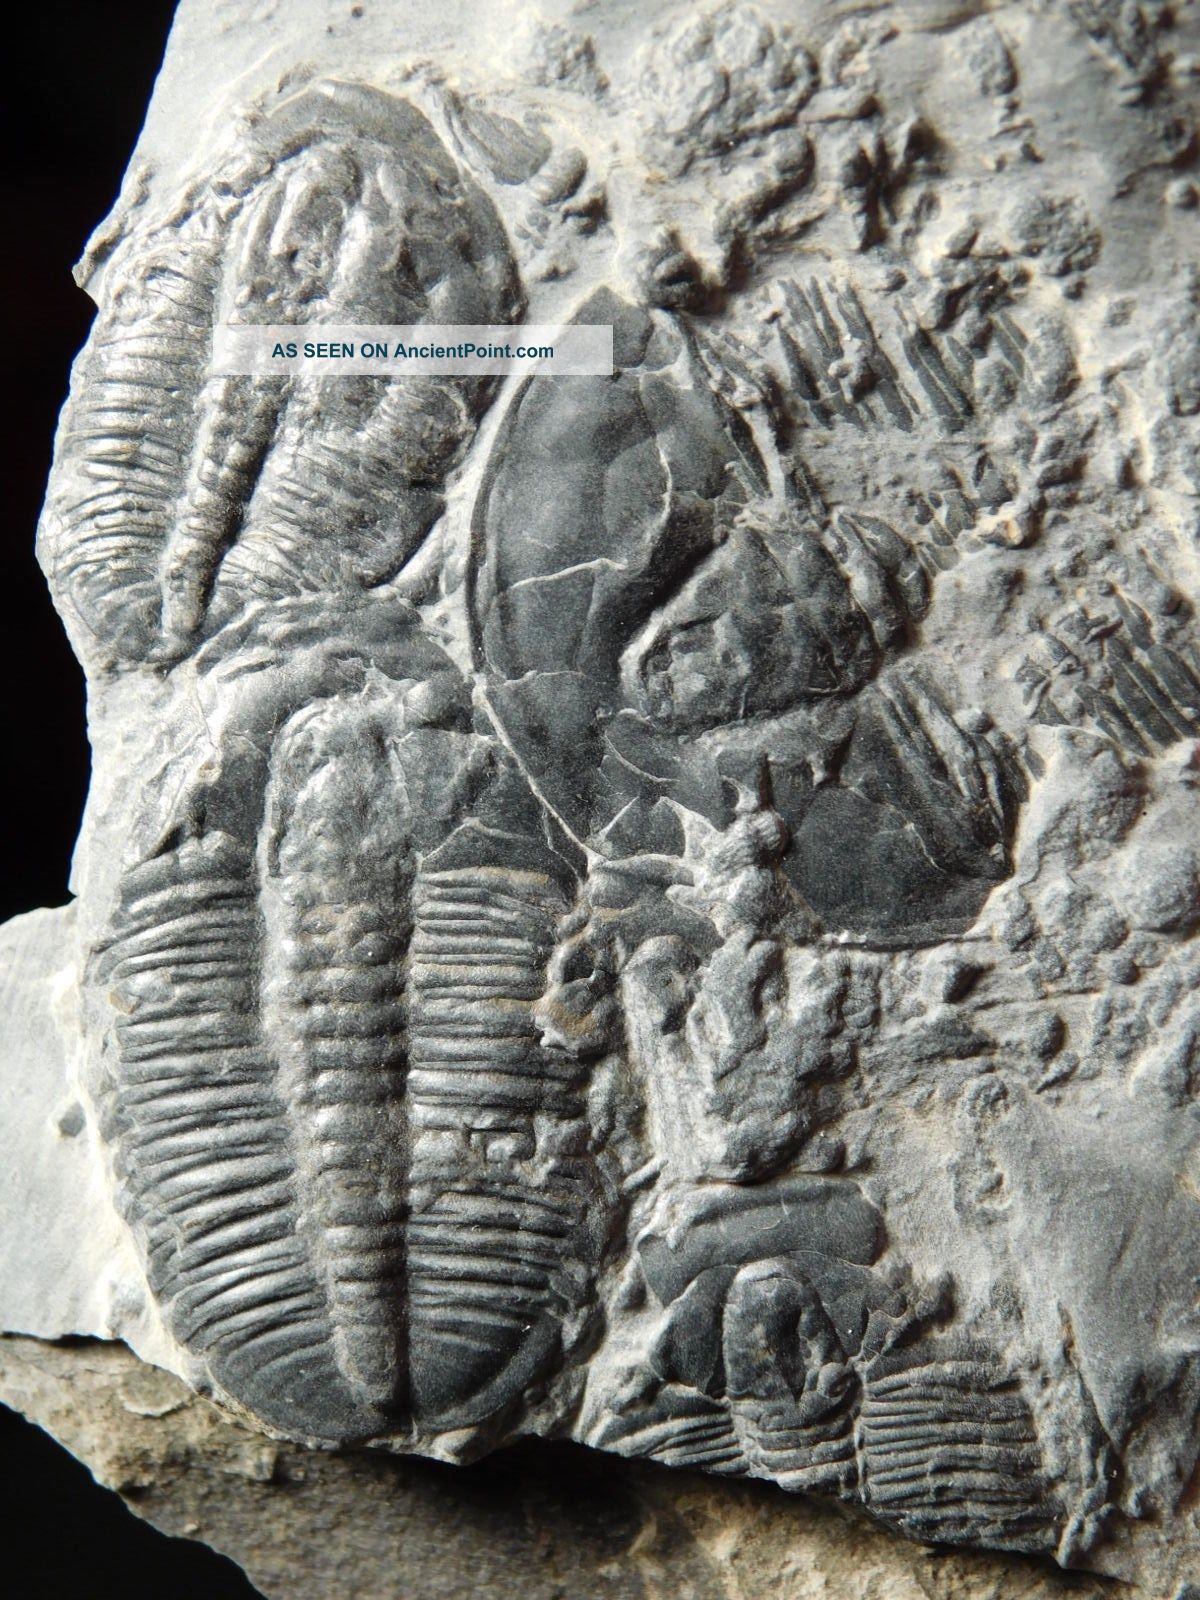 Two 100 Natural Entwined Utah Trilobite Fossils In Cambrian Era Matrix 282gr E The Americas photo